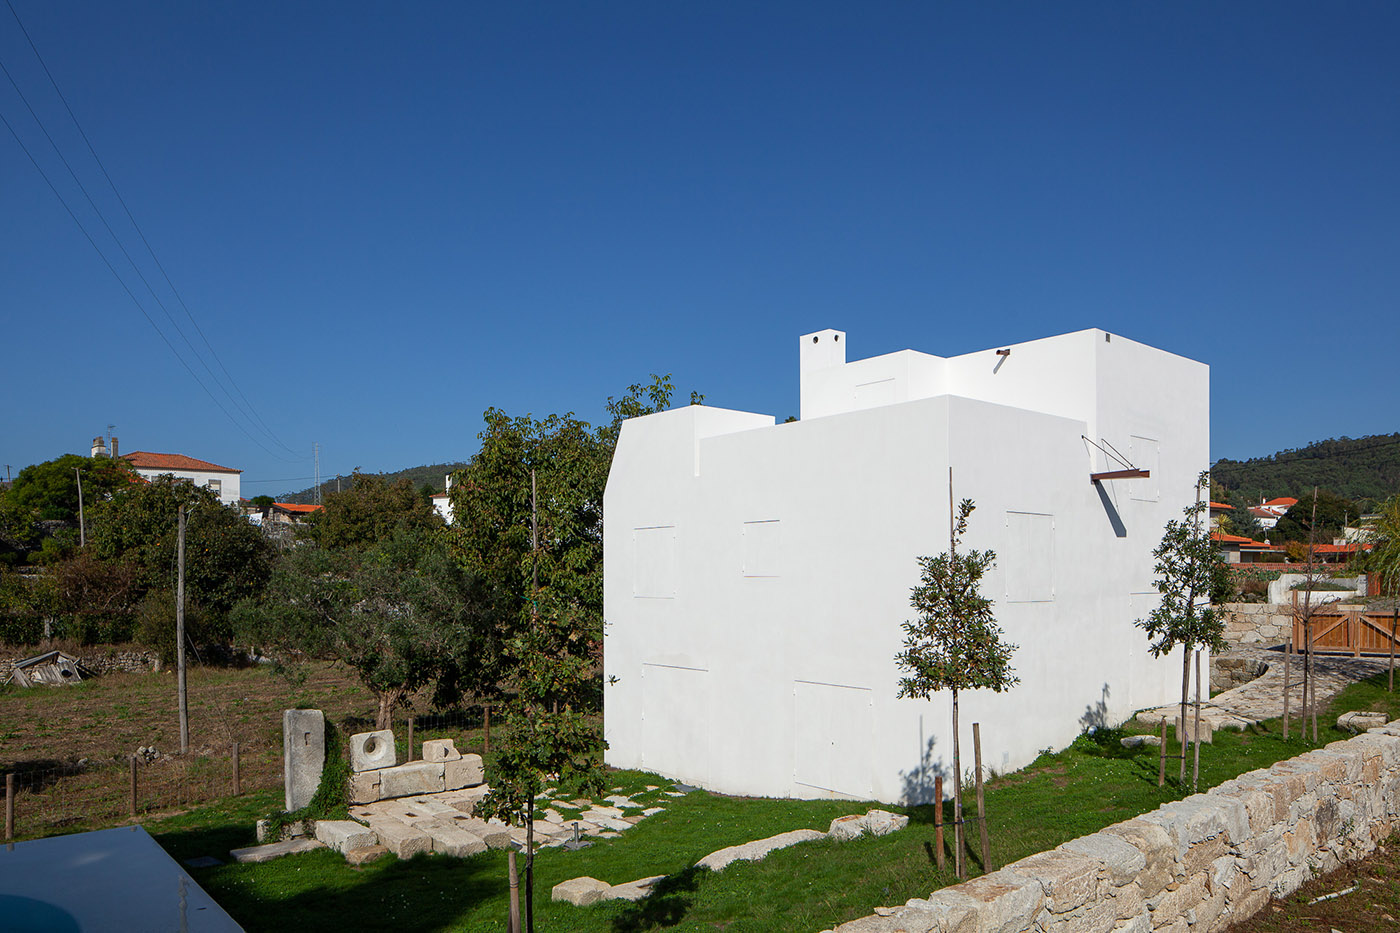 Casa em Afife. Minimalist architecture designed to blend in with the natural slopes of the land